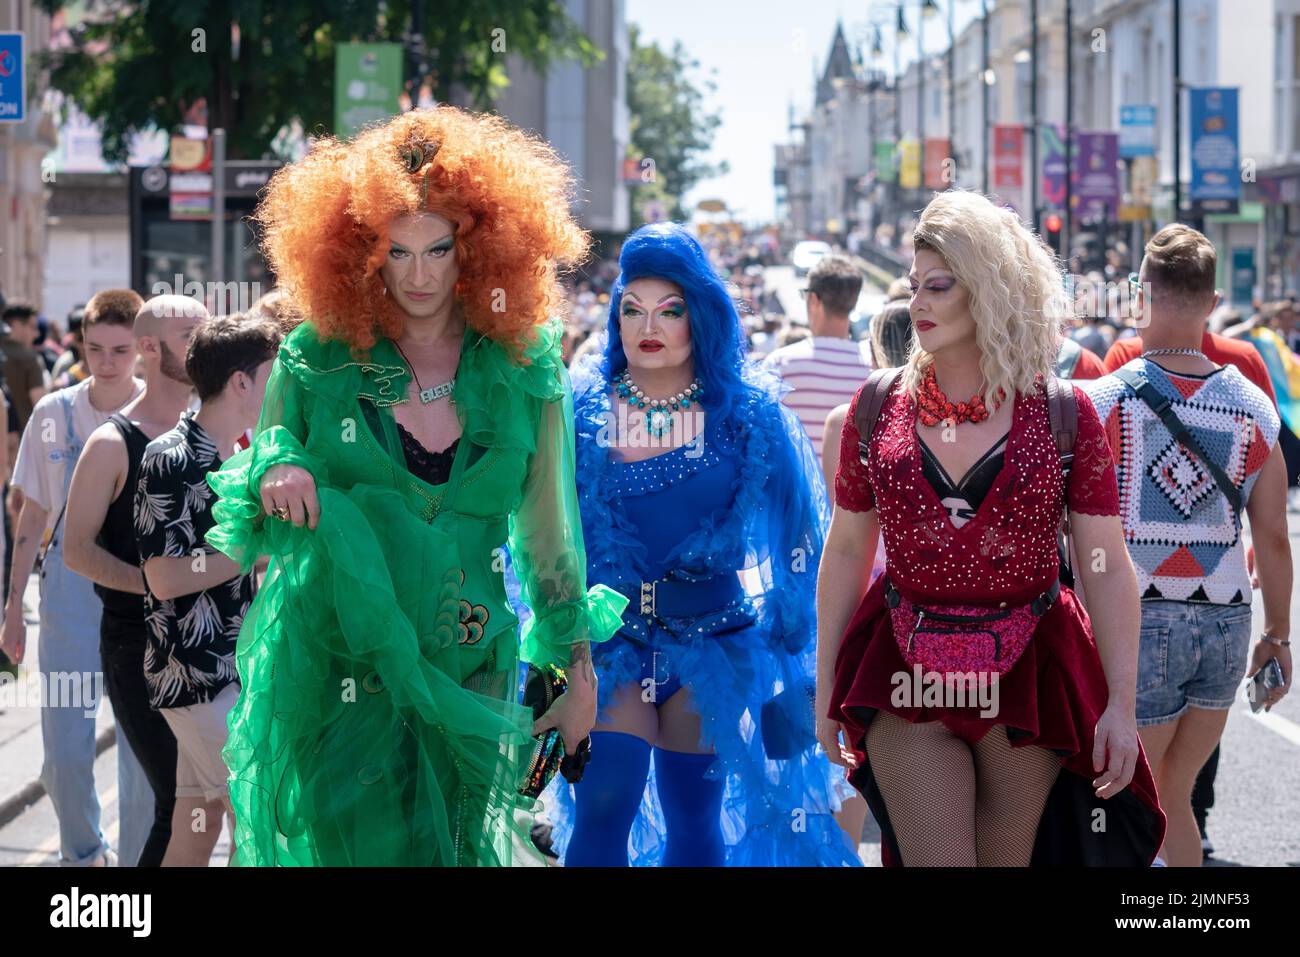 East Sussex, UK. 6th Aug, 2022. Brighton and Hove Pride 2022: Drag queen performers join the crowds as thousands celebrate Pride in Brighton after two-year hiatus. One of UK's biggest LGBTQ  parades returns to mark 30th anniversary after Covid cancellations. As many as 300,000 people on Saturday are expected to fill the streets of Brighton celebrating the return of one of the UK's biggest Pride events. Credit: Guy Corbishley/Alamy Live News Stock Photo